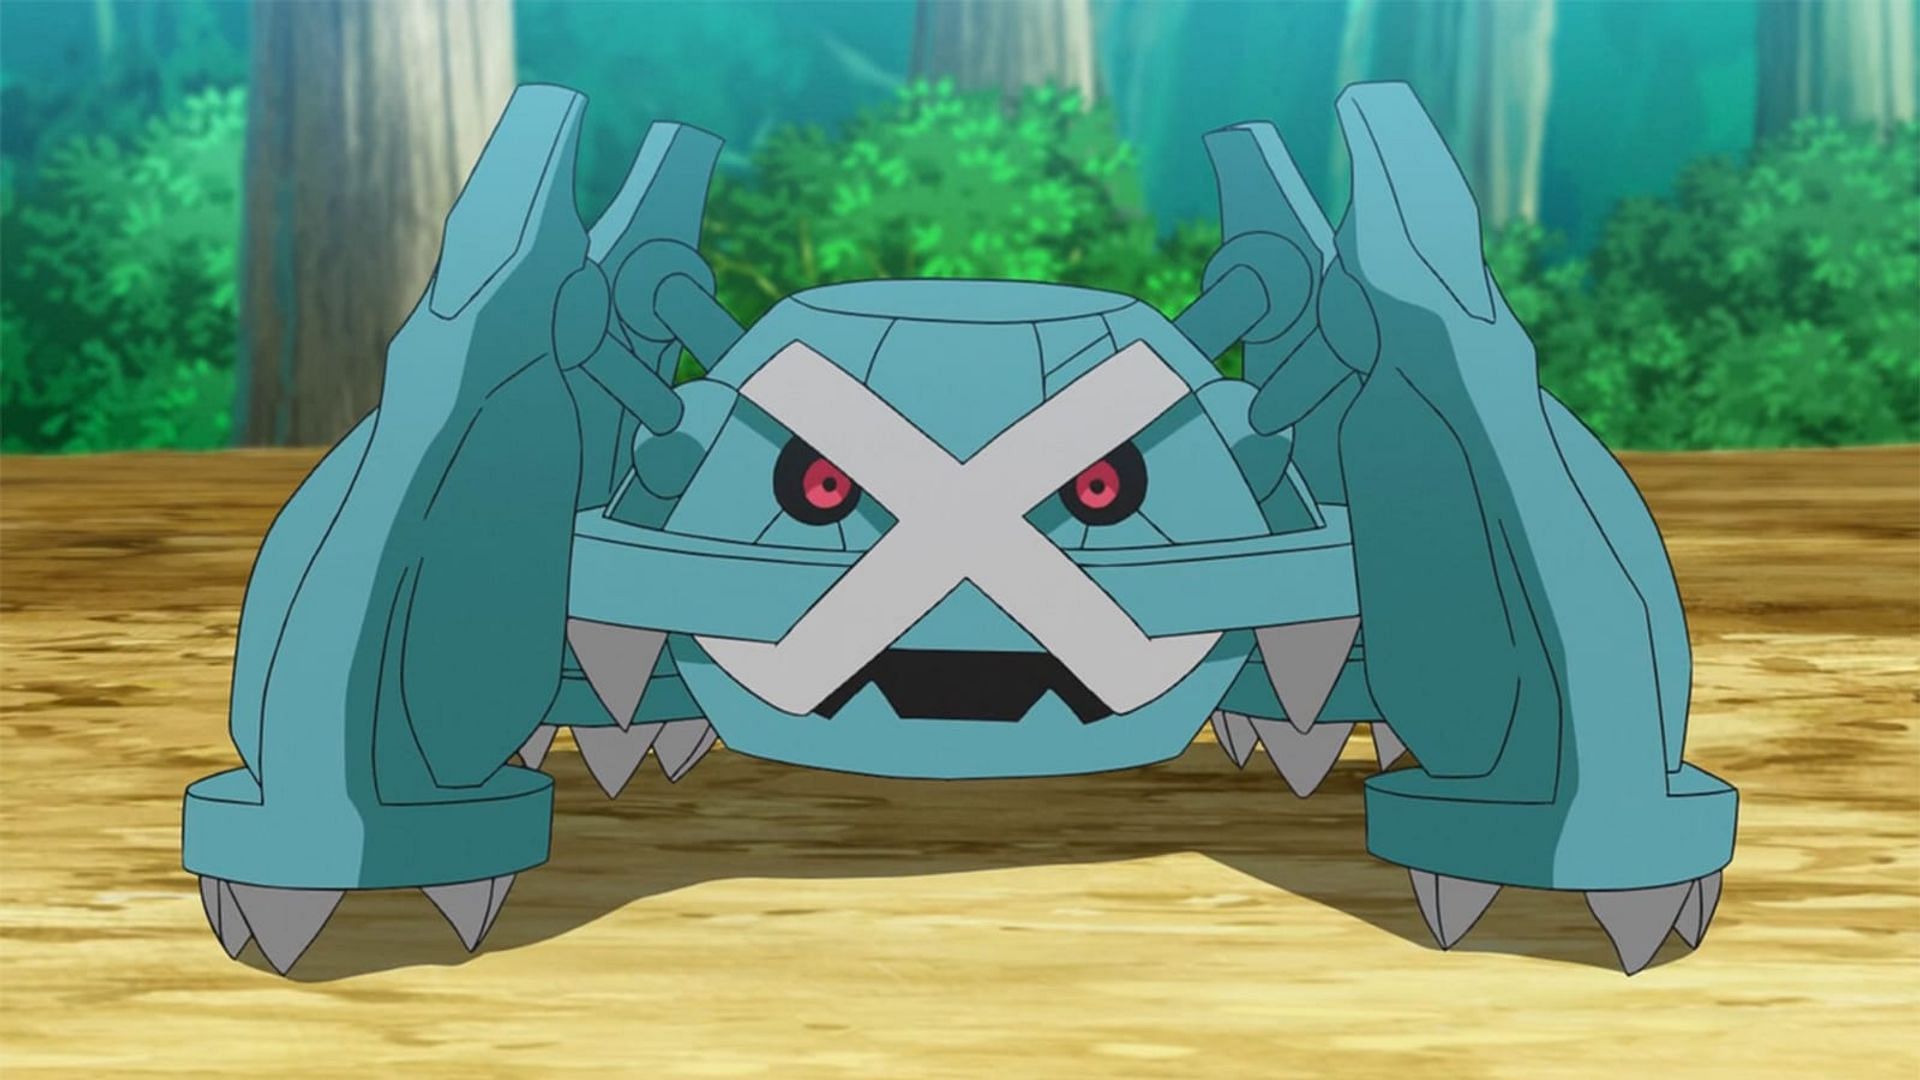 Metagross is one of the most notable Steel-type Pokemon in the franchise (Image via The Pokemon Company)